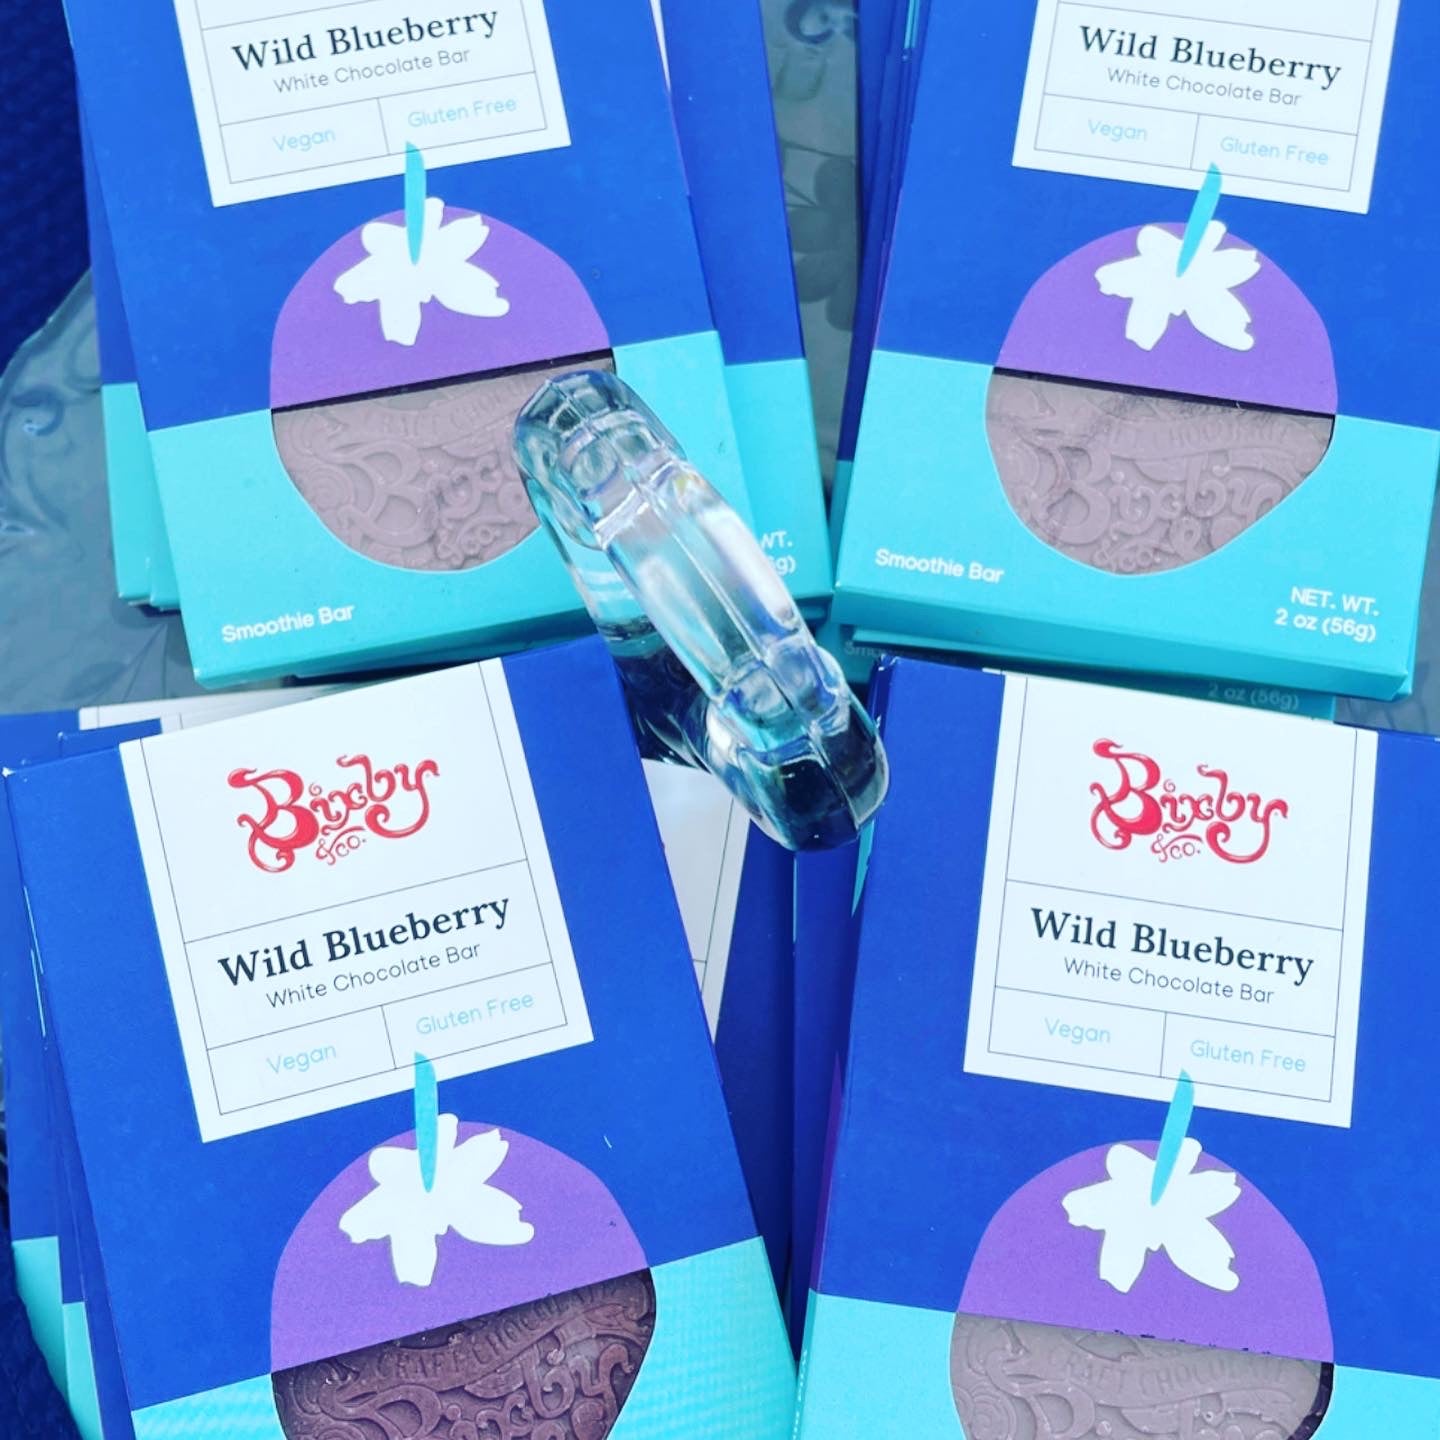 Bixby Chocolate Participates in official Wild Maine Blueberry Proclamation